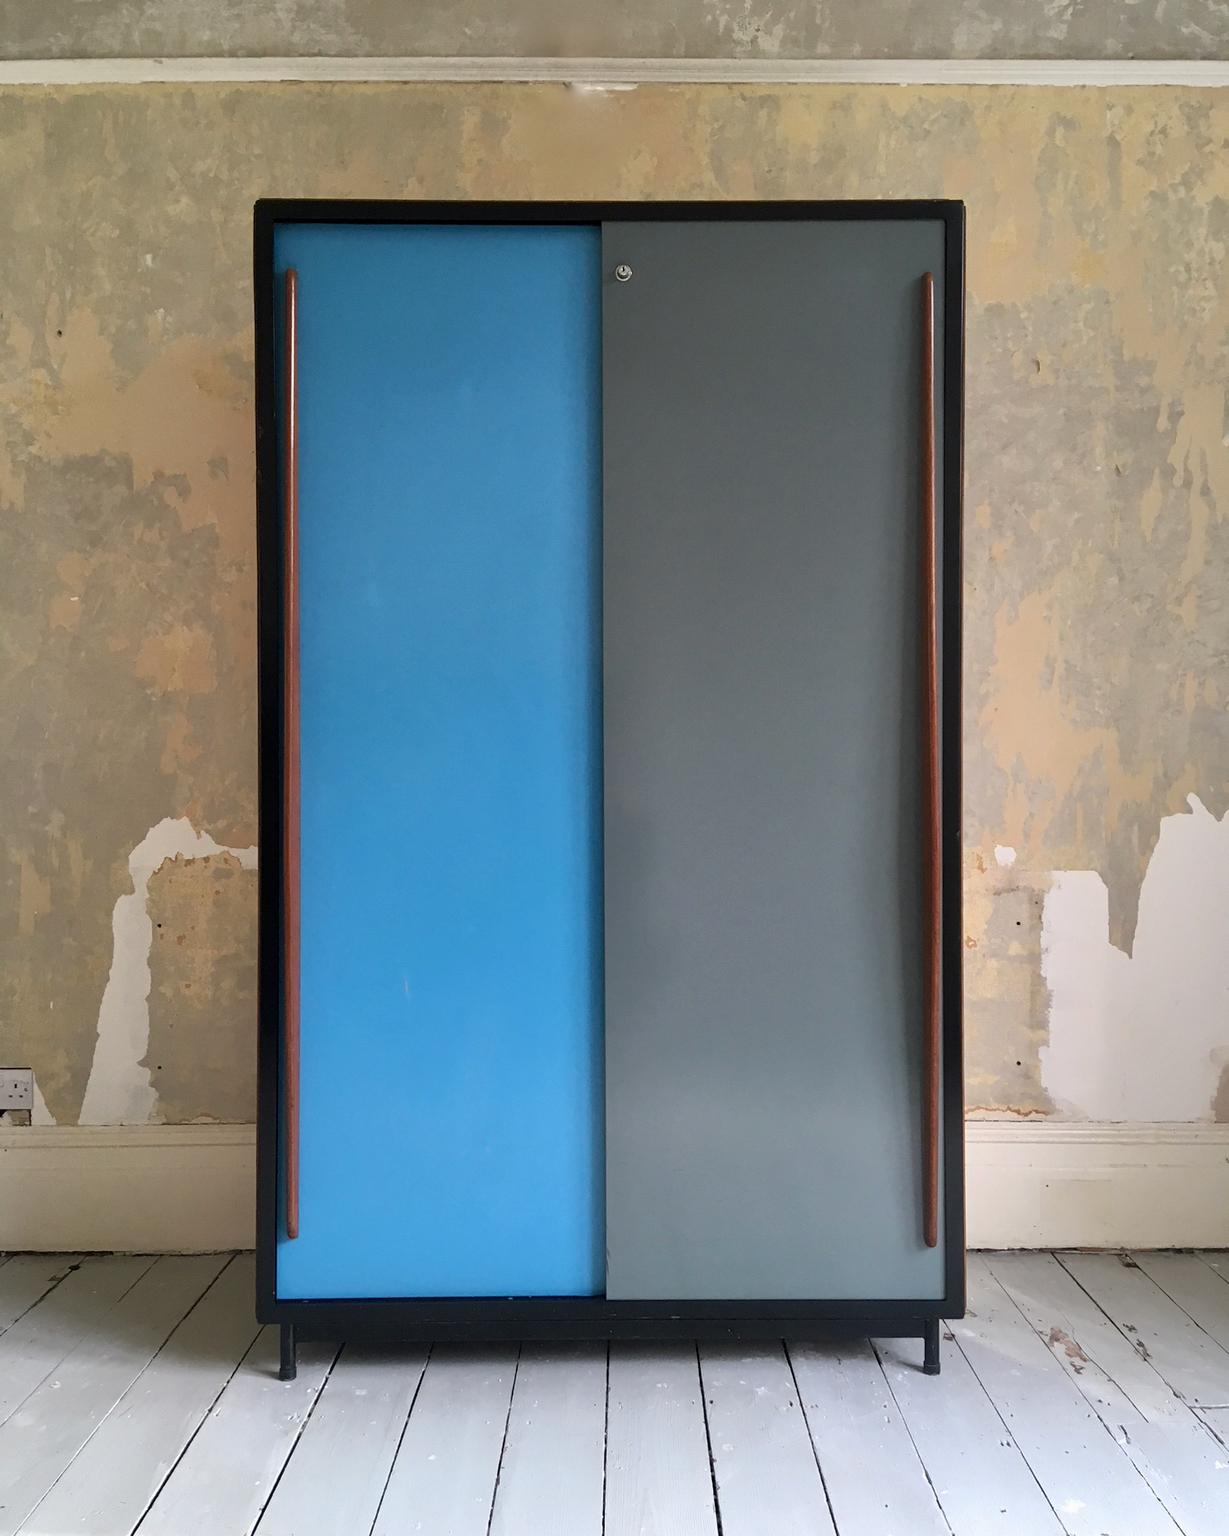 A large cabinet by Willy Van Der Meeren for Tubax, Belgium, 1950s.

The cabinet has a black metal frame and back, with blue and grey metal sliding doors with long, elegant fin-shaped wooden handles; the sides of the cabinet are plywood. The